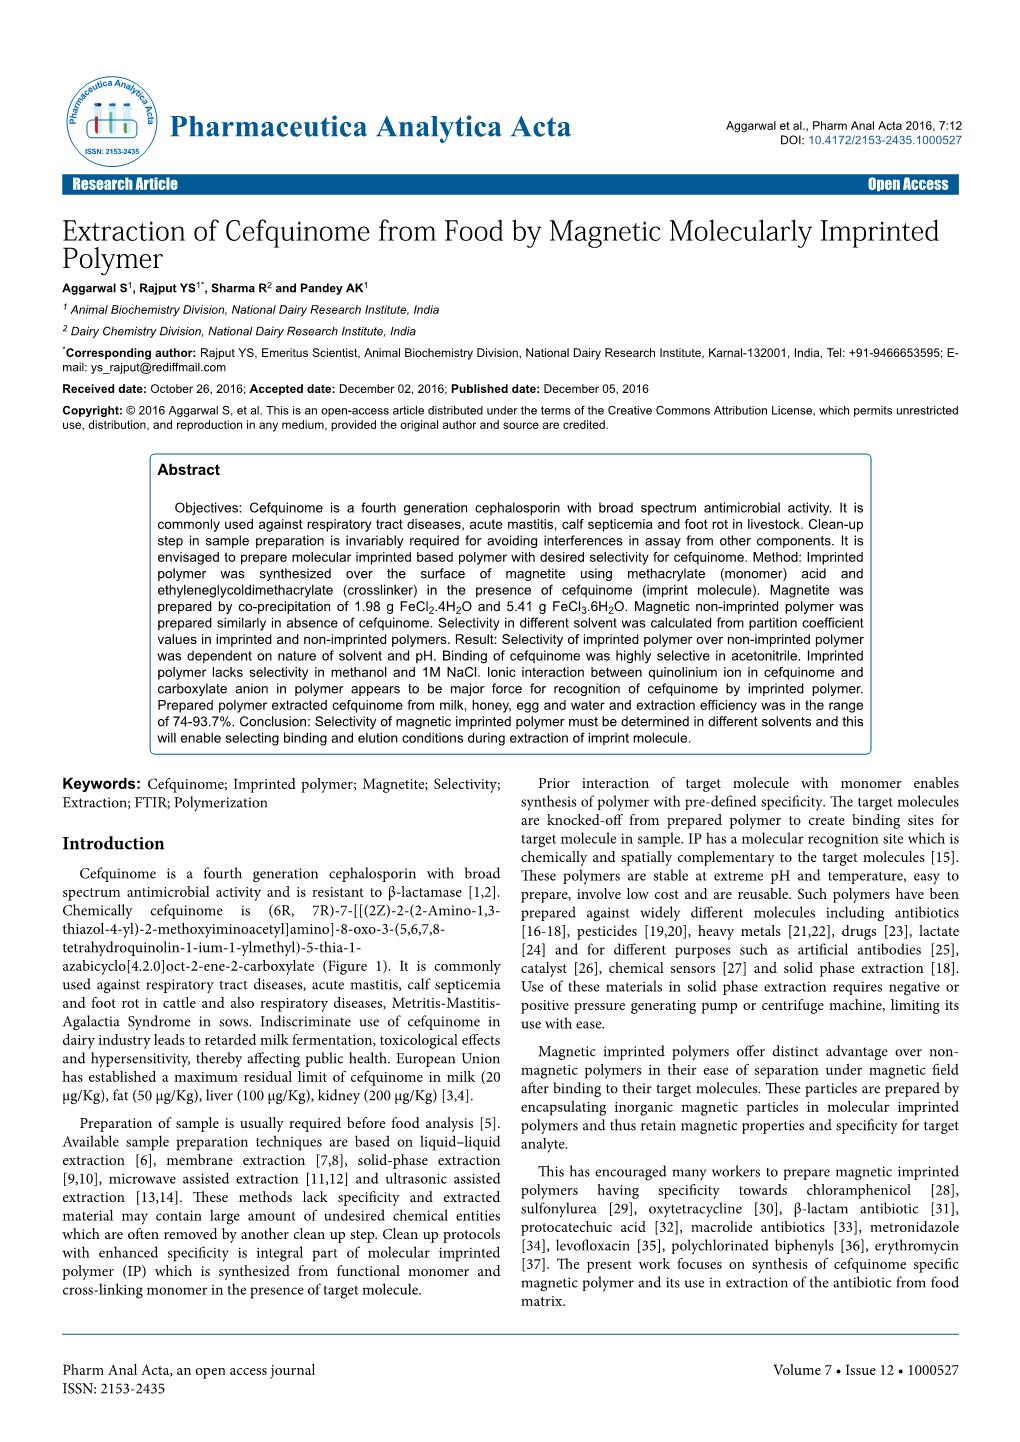 Extraction of Cefquinome from Food by Magnetic Molecularly Imprinted